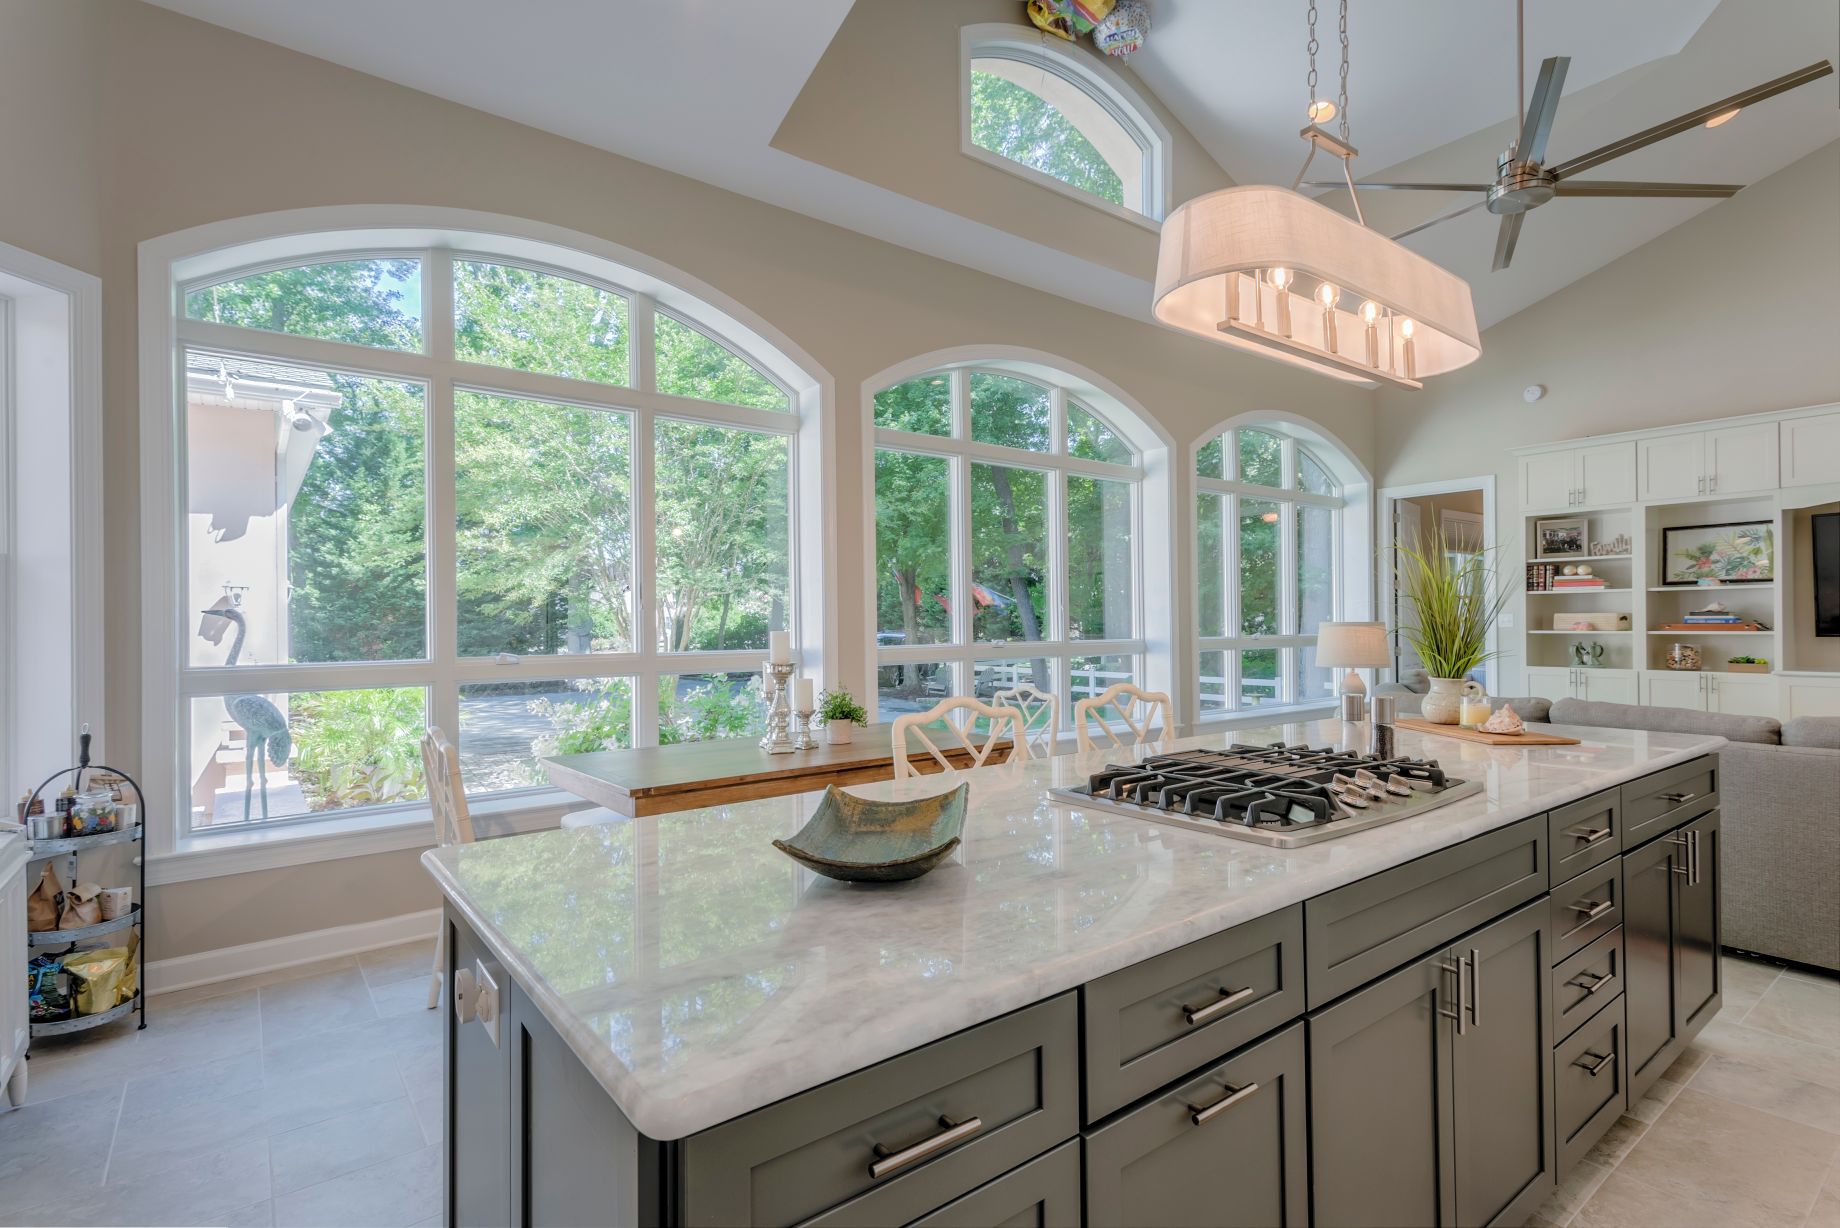 Kitchen in Juniper Court, Ocean Pines MD with Large Windows